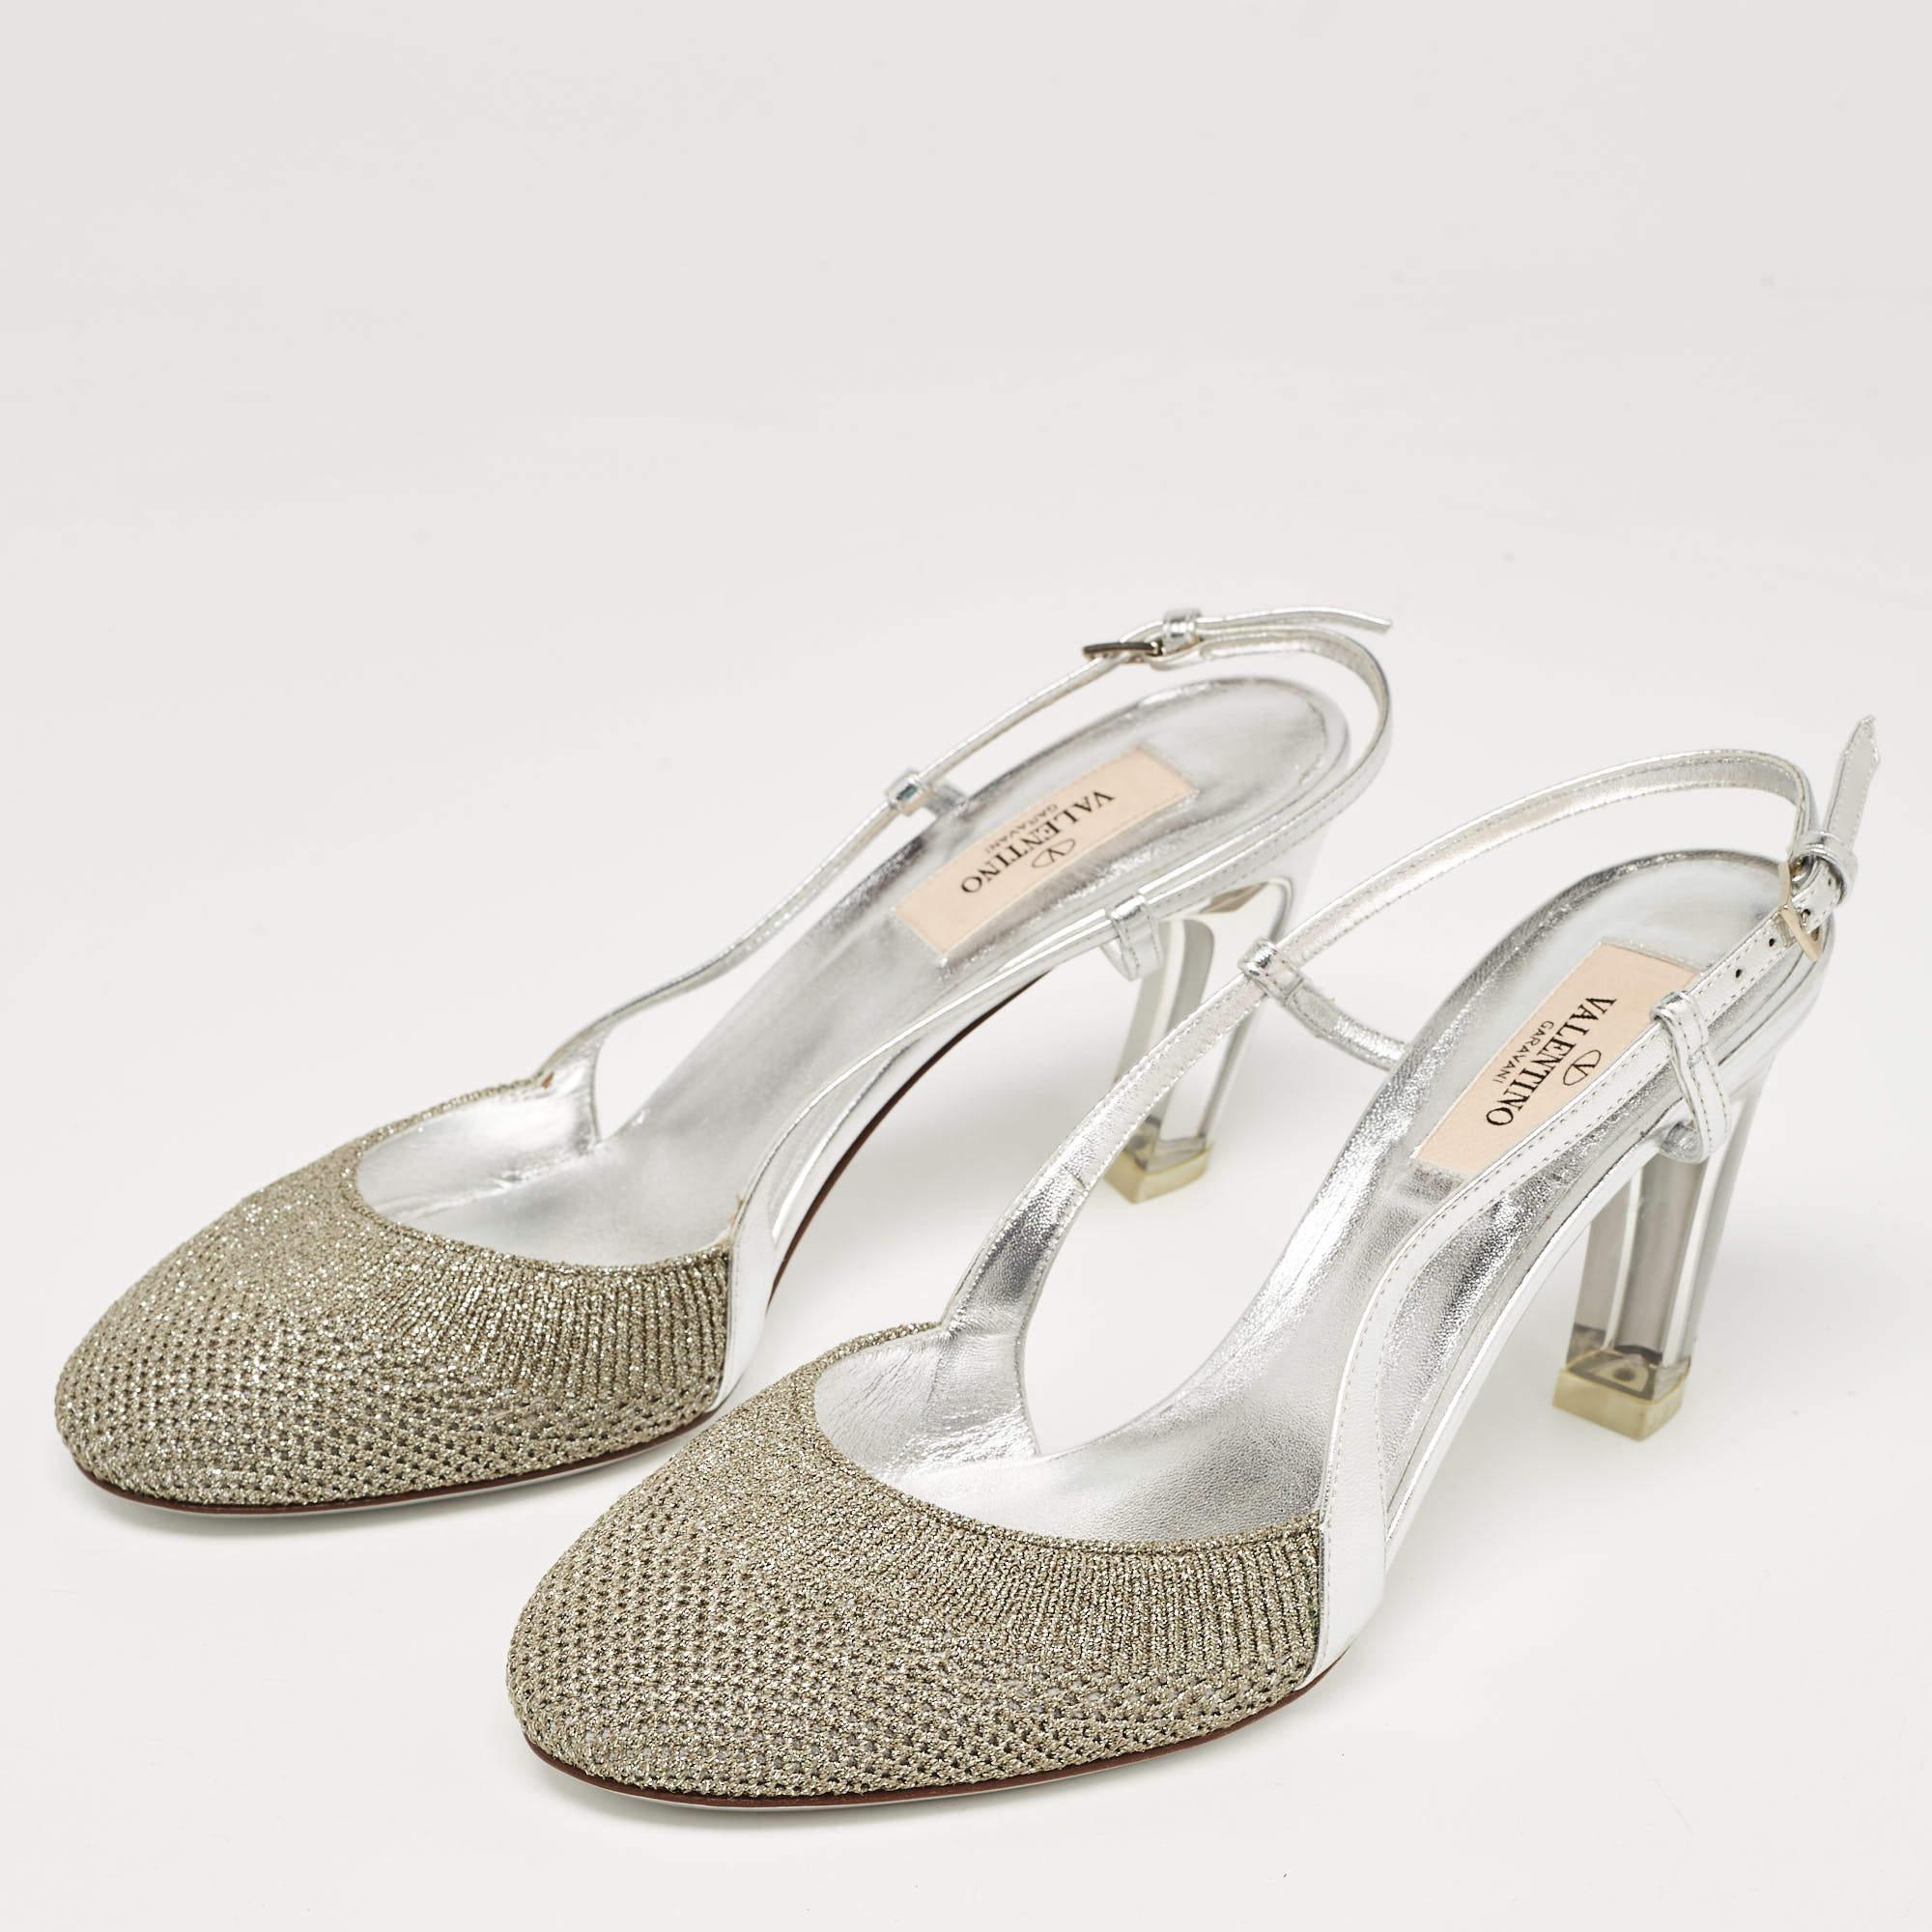 Perfectly sewn and finished to ensure an elegant look and fit, these Valentino silver shoes are a purchase you'll love flaunting. They look great on the feet.

